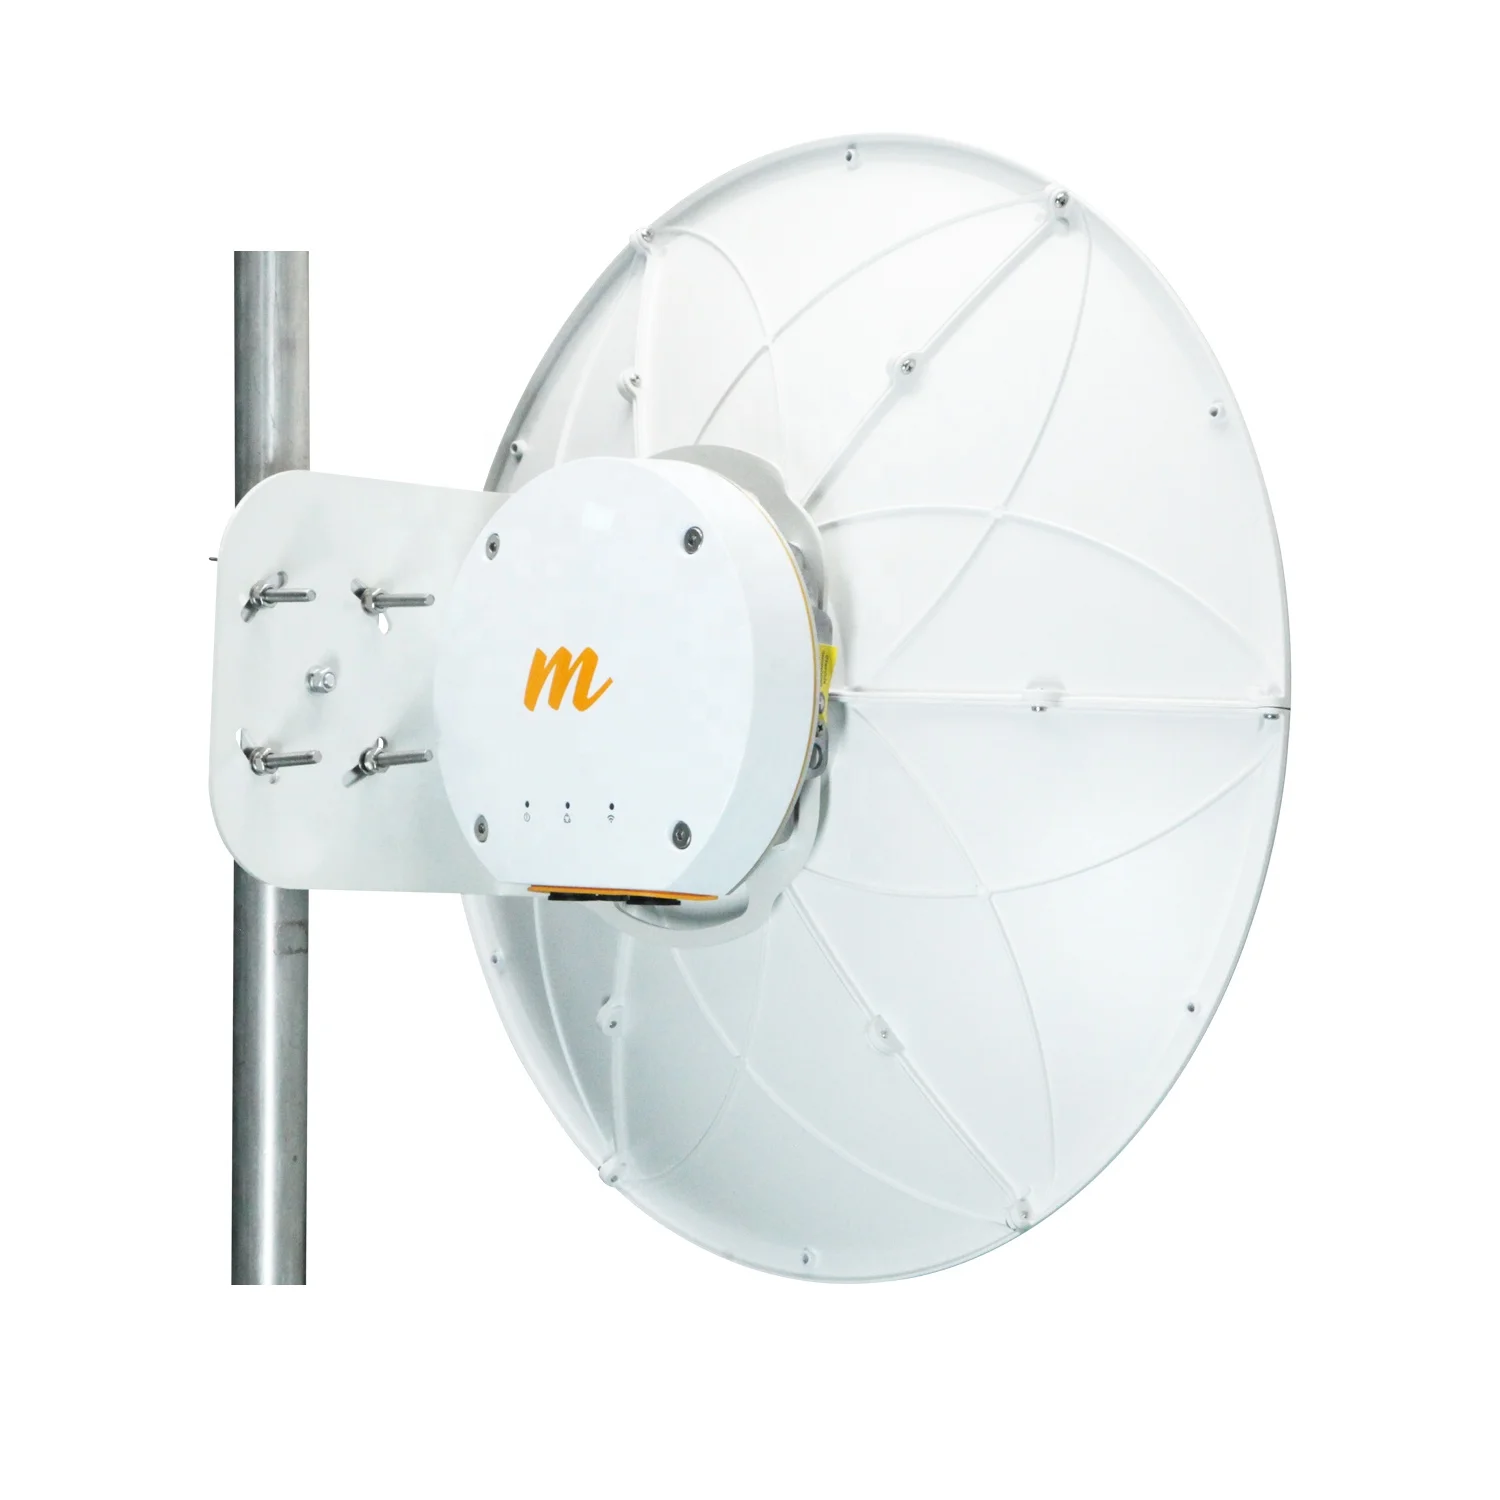 

10.7-11.7 GHz 0.6M 2 Ft High Gain Parabolic microwave antenna, Dual Polarized, for MIMOSA B11 and Ubiquiti Airfiber cambium